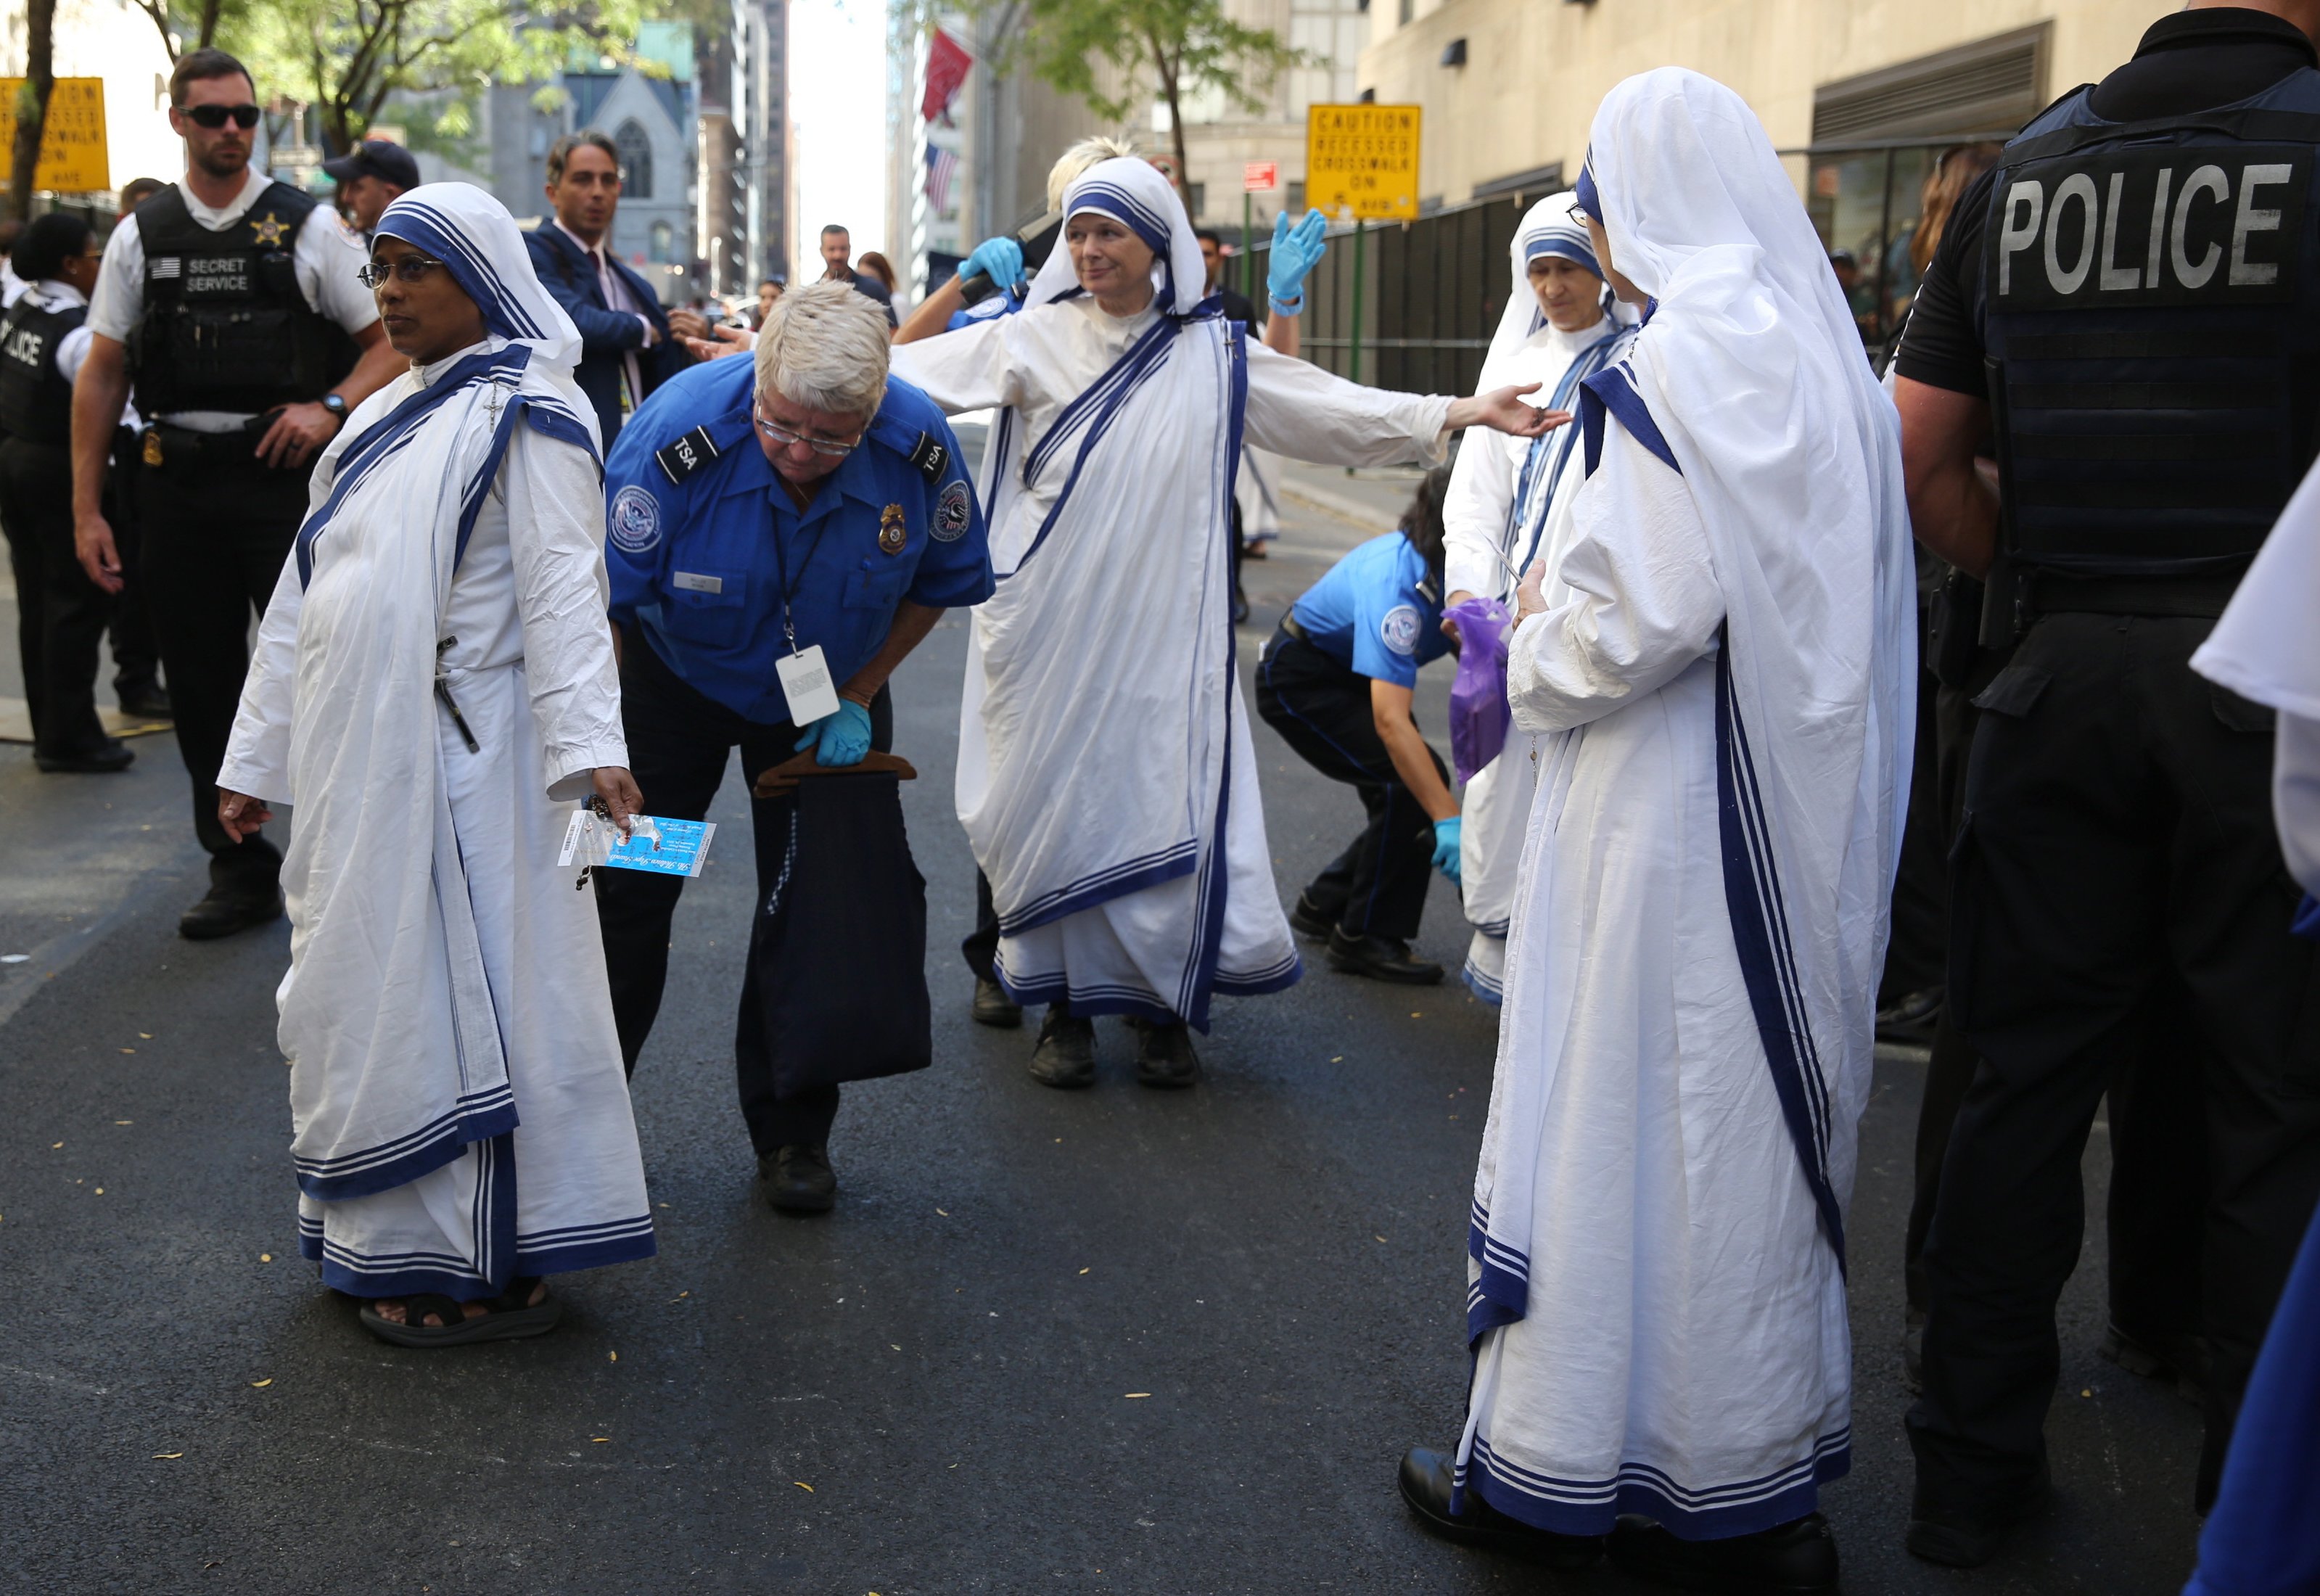 A New York City police officer searches nuns outside St. Patrick's Cathedral prior to the arrival of Pope Francis in New York, on Sept. 24, 2015.